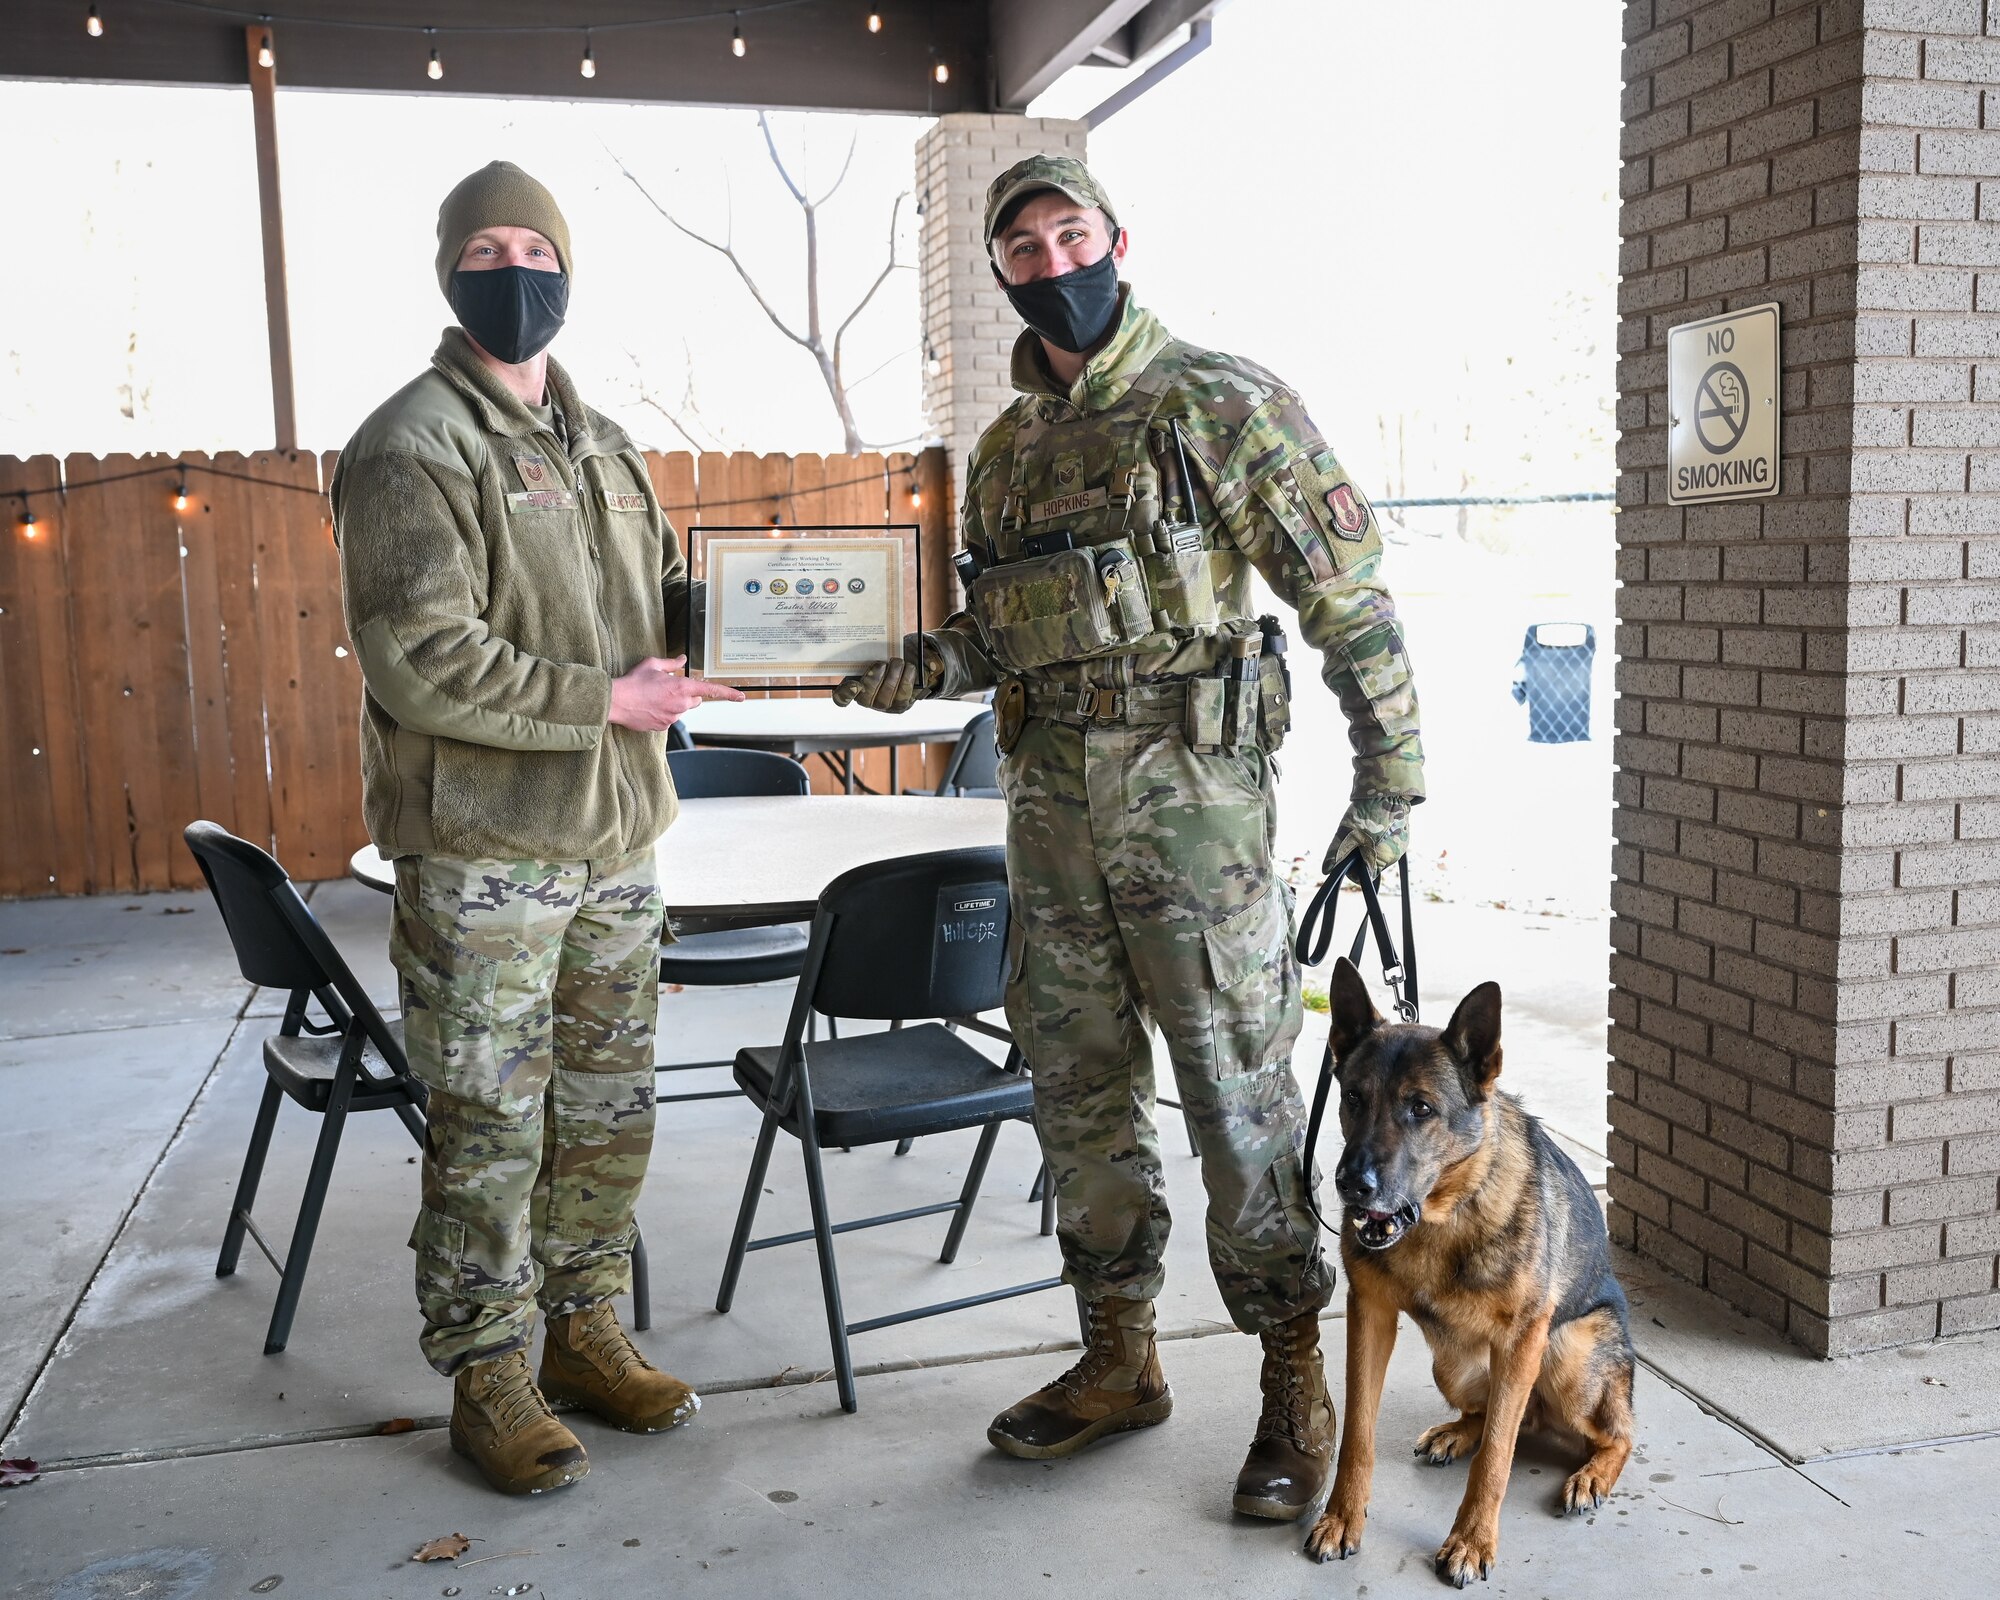 Military working dog Bastas with former handler Staff Sgt. Tyler Hopkins (right), 75th Security Forces Squadron, is recognized during his retirement celebration by Tech. Sgt. Kyle Snape, 75th SFS MWD NCOIC, Dec. 10, 2021, at Hill Air Force Base, Utah. MWD Bastas retired honorably after serving six years with the 75th SFS at Hill. (U.S. Air Force photo by Cynthia Griggs)